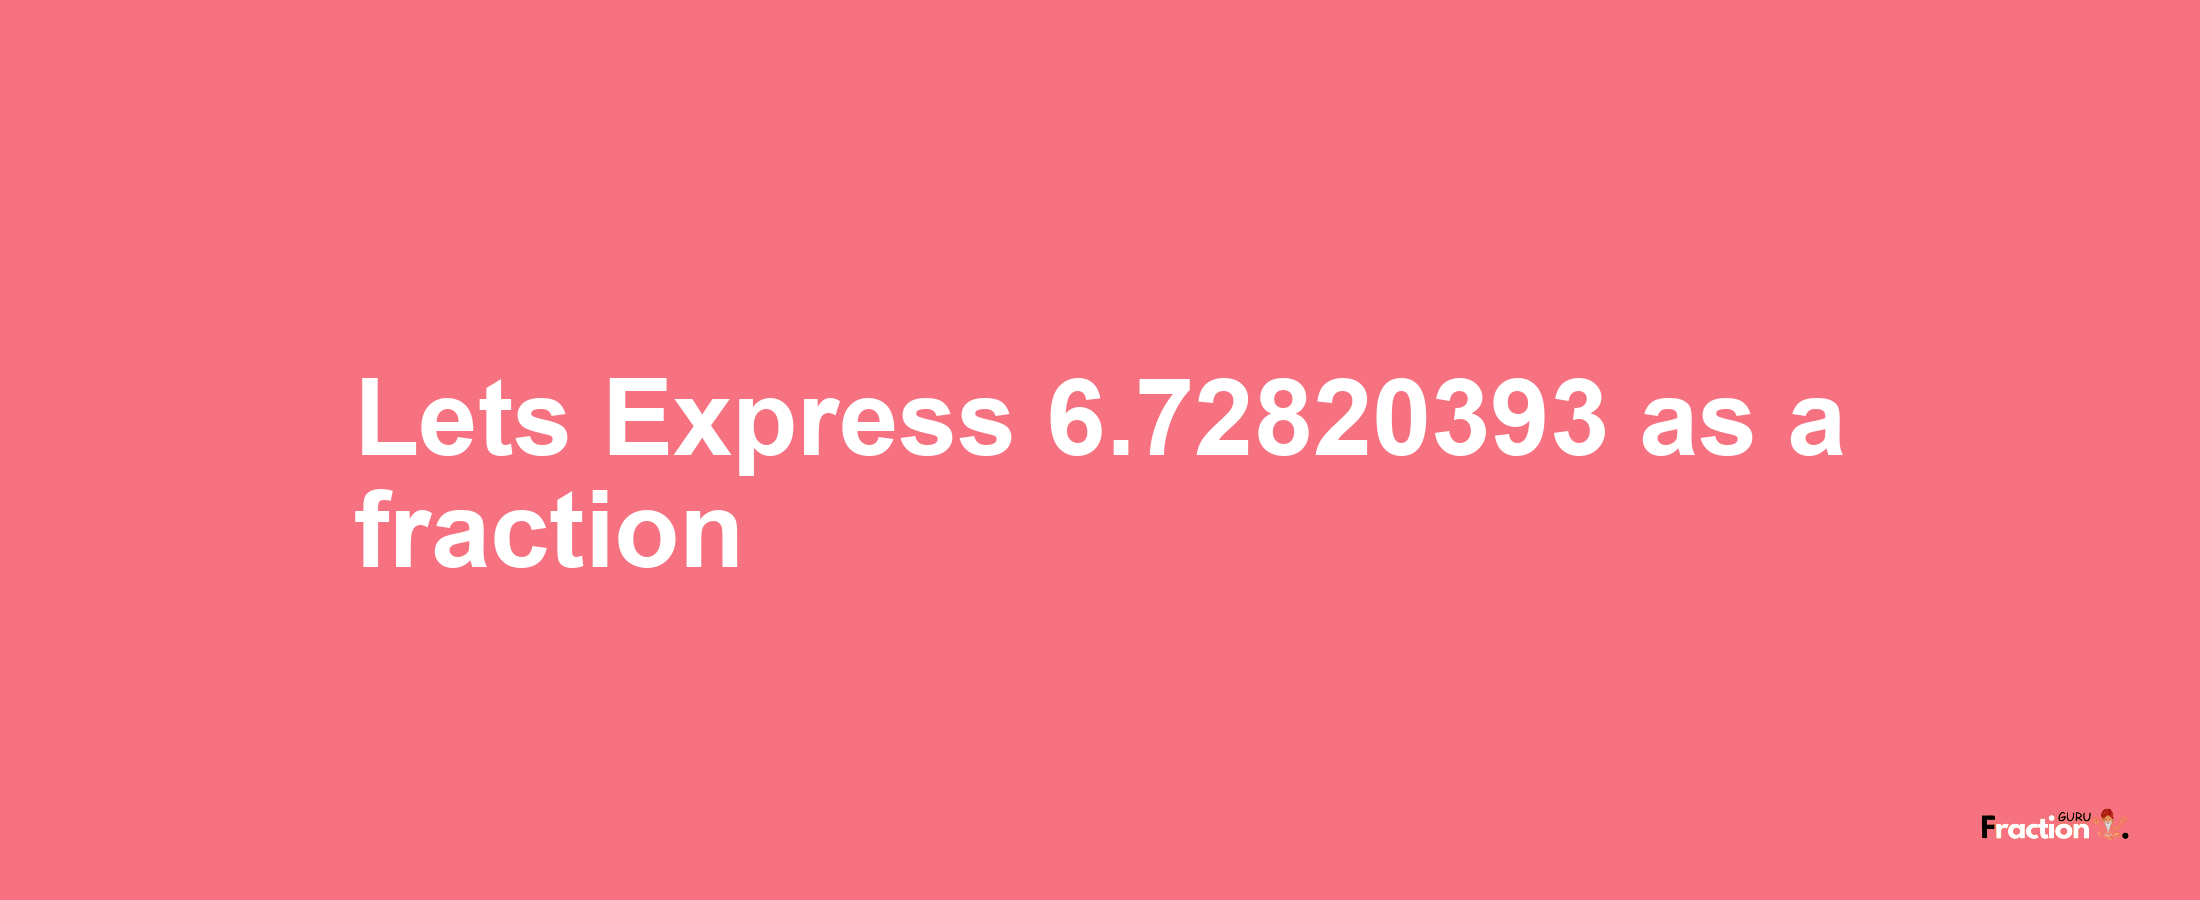 Lets Express 6.72820393 as afraction